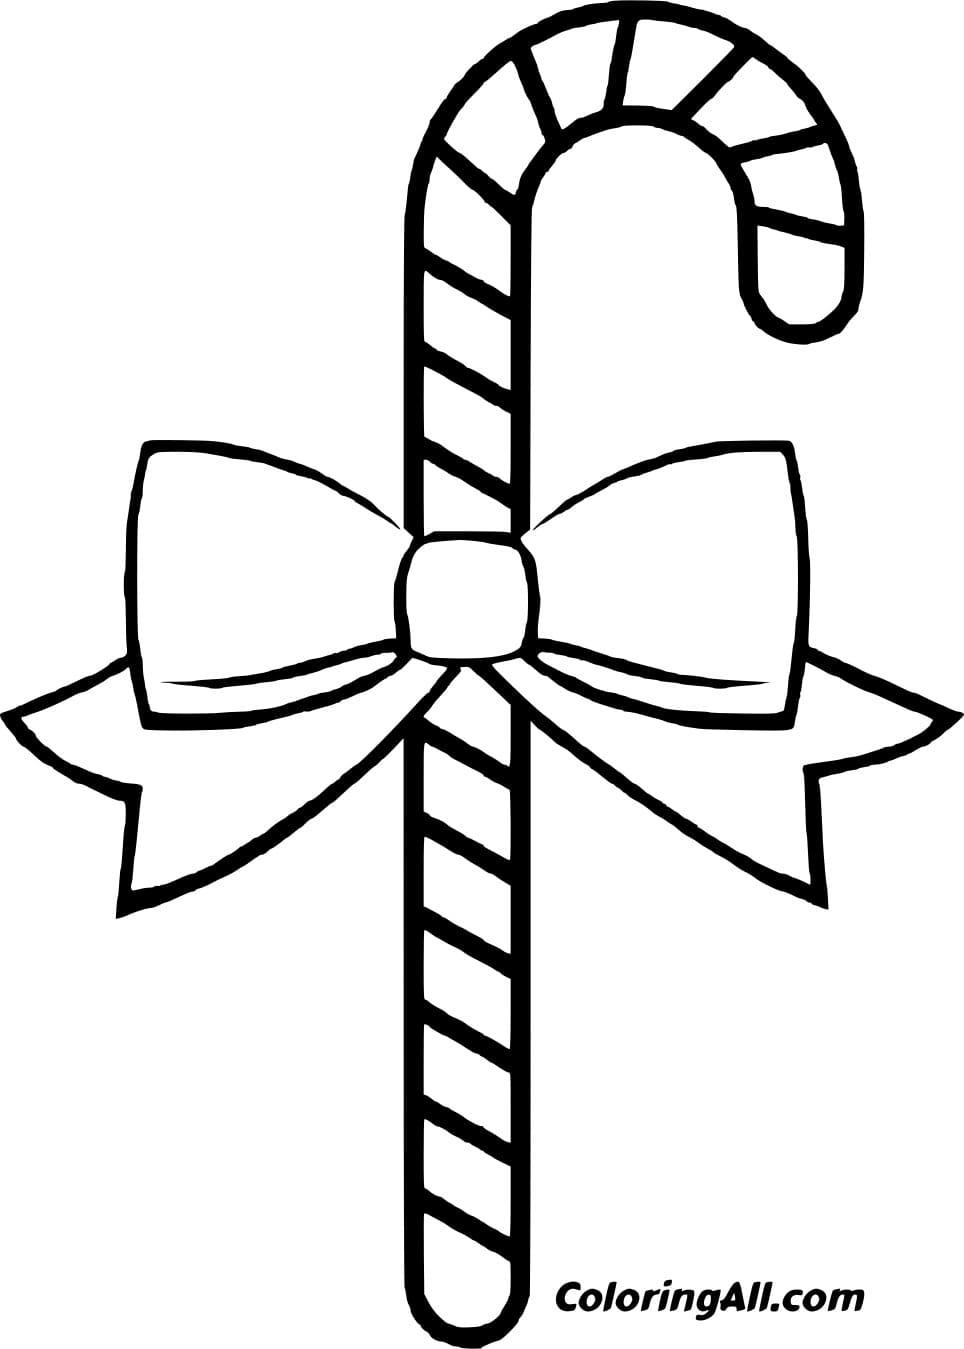 Simple Thin Candy Cane With A Bowknot Coloring Page